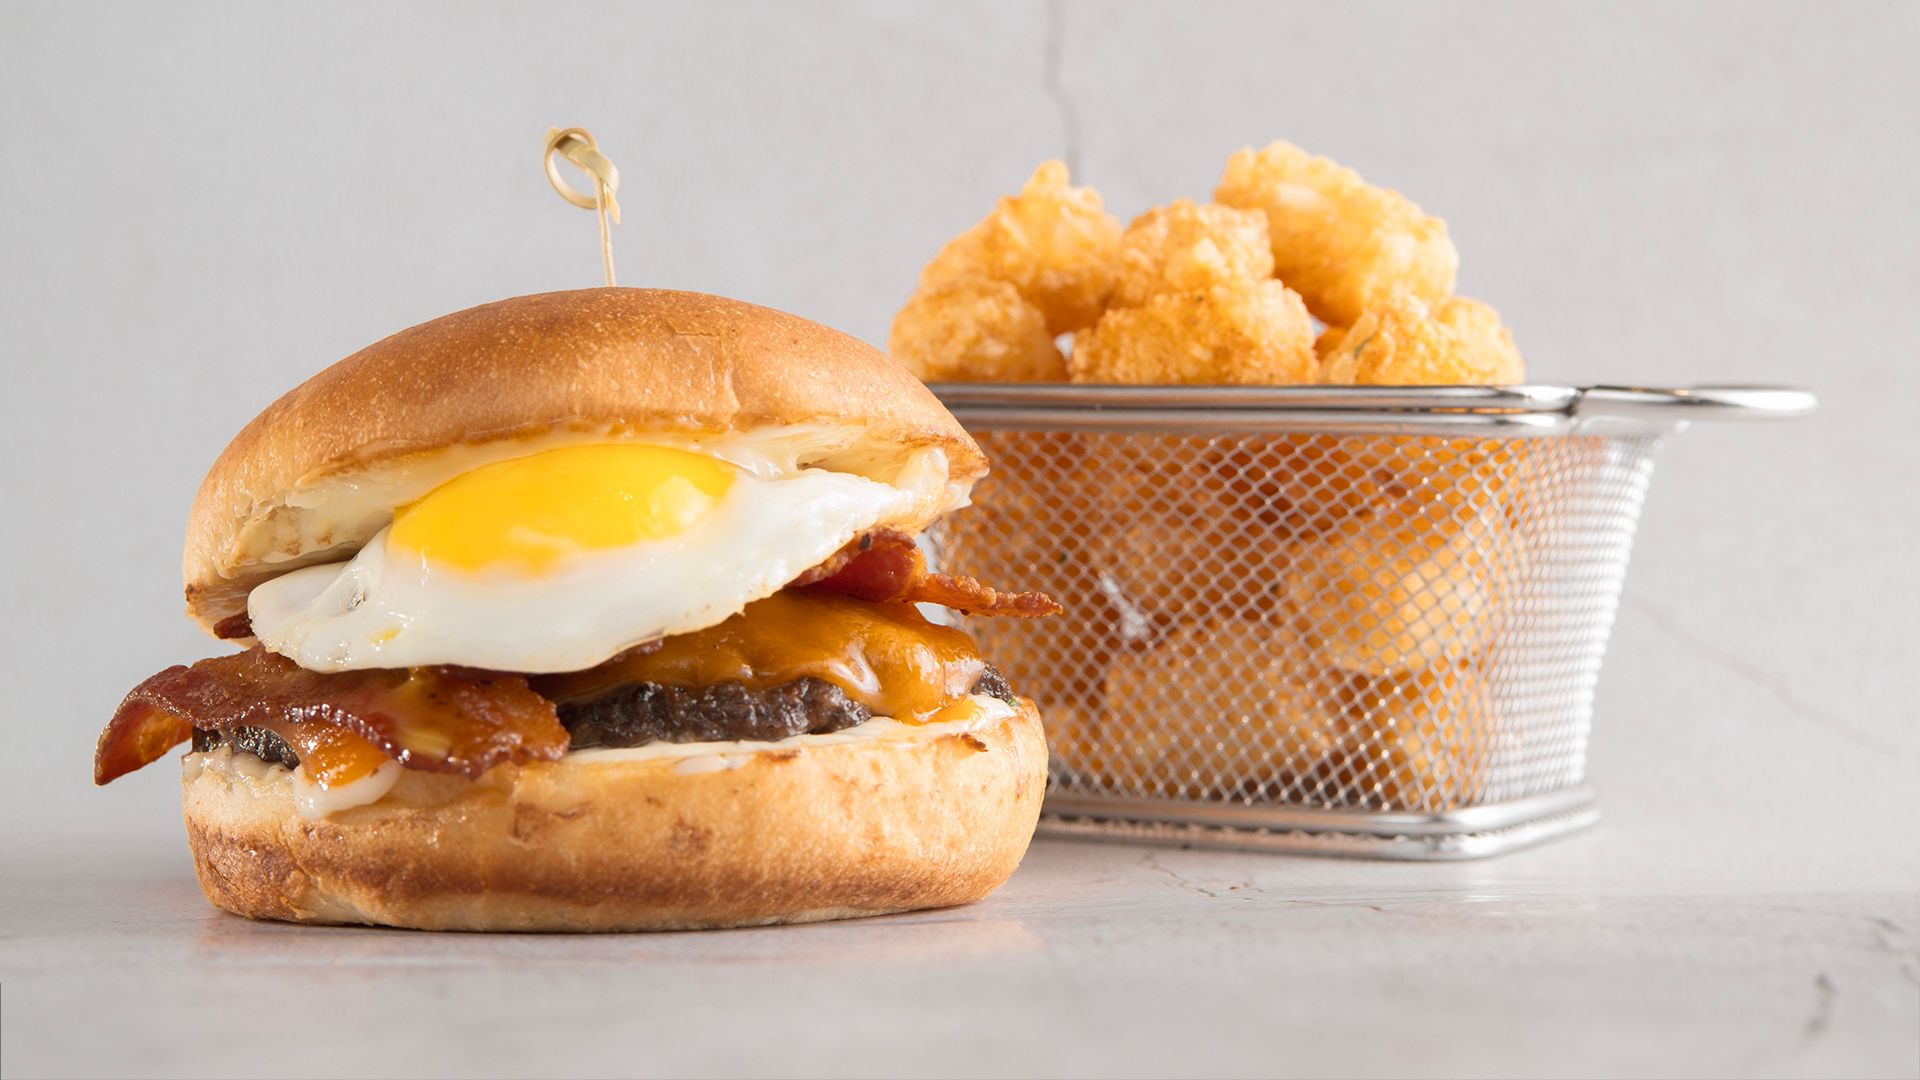 Breakfast burger with tater tots